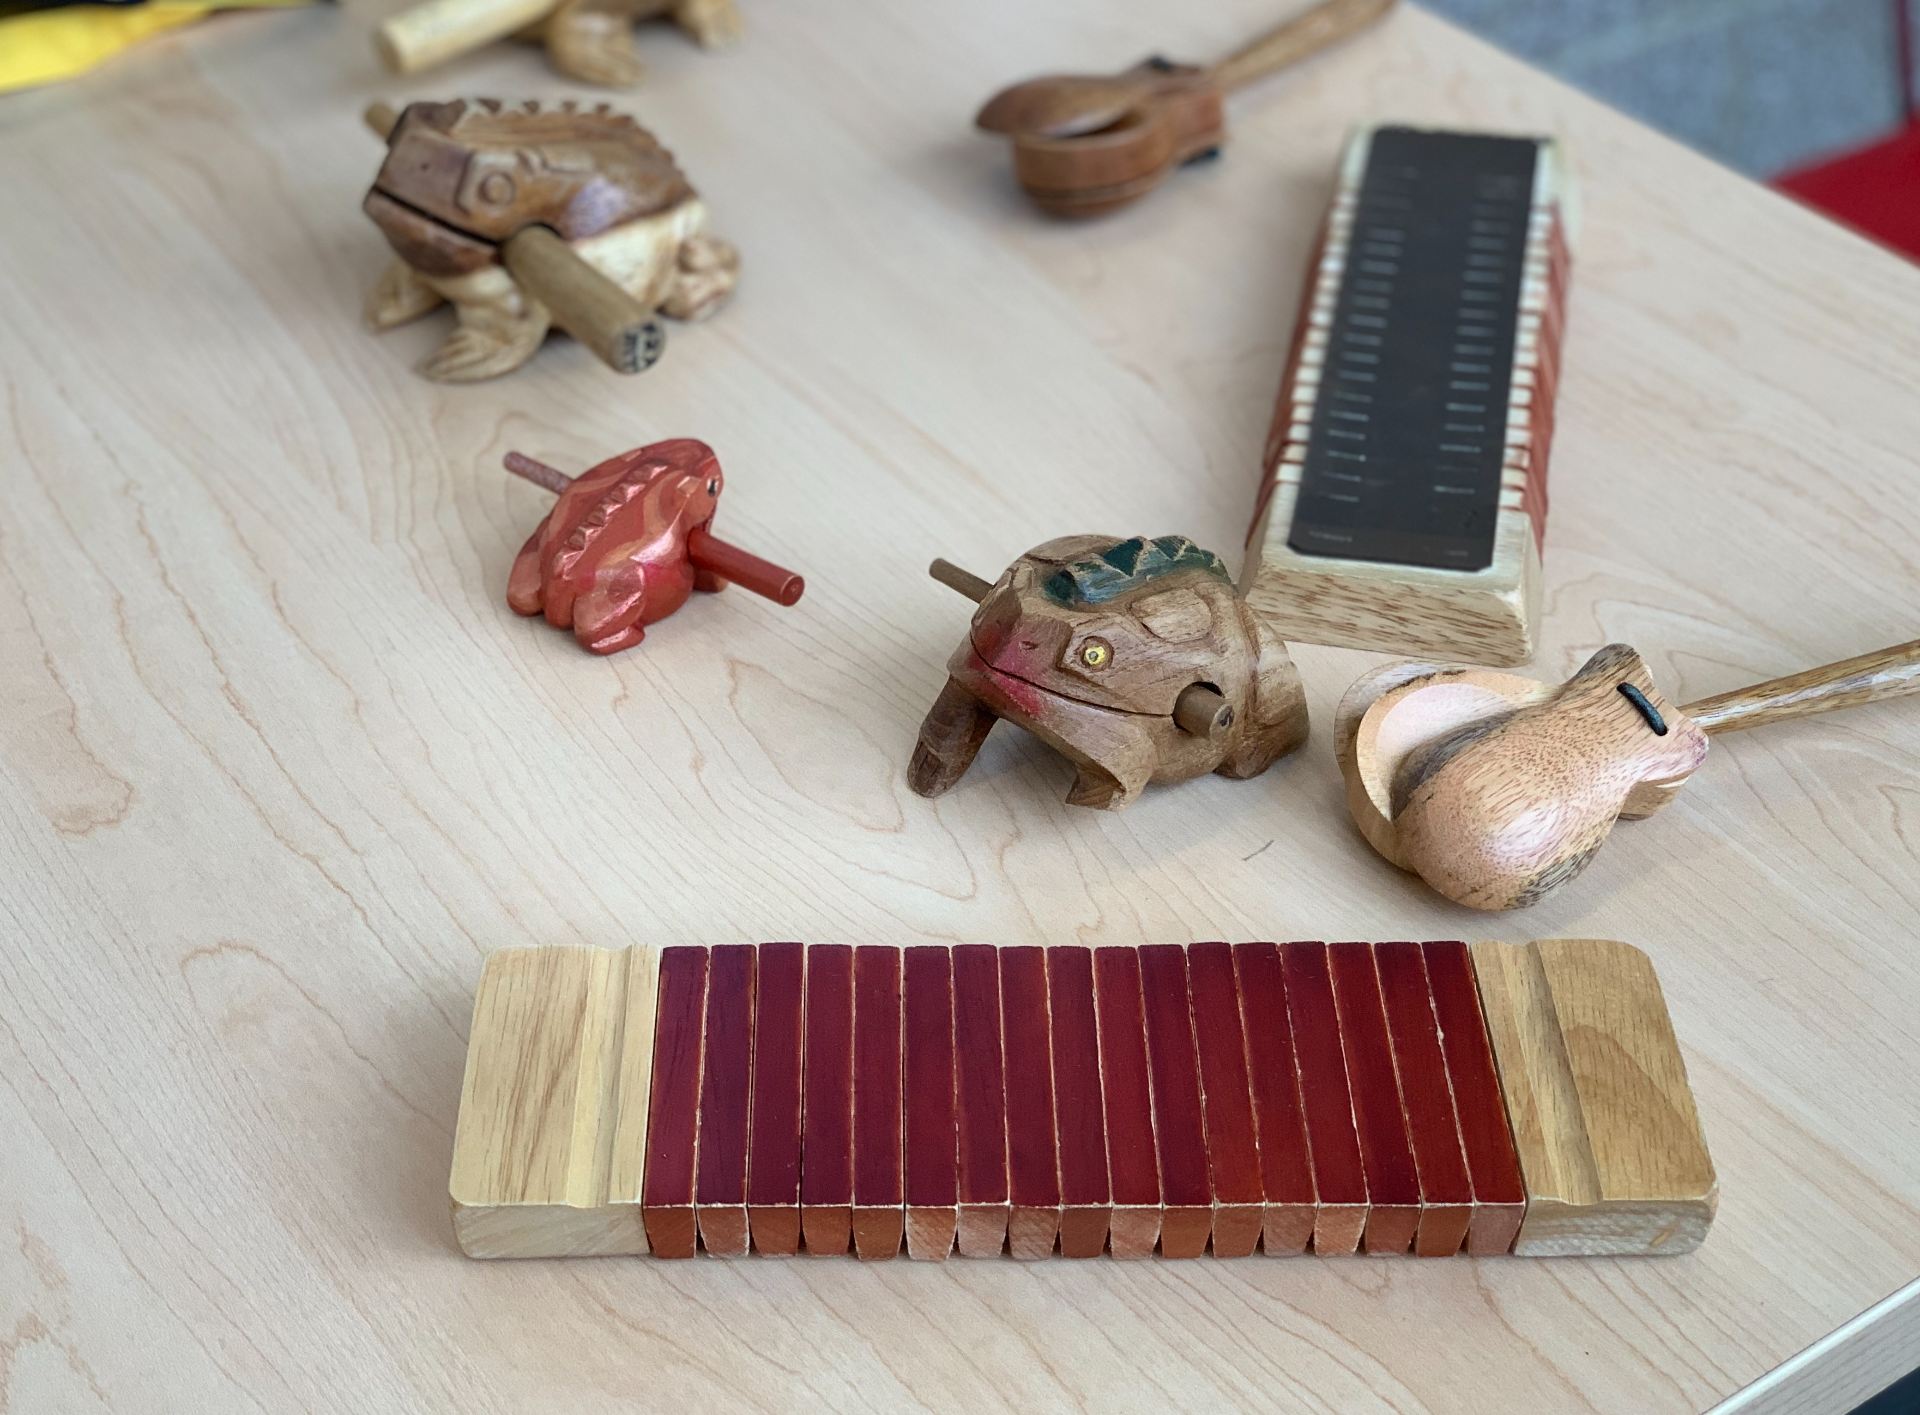 Three types of wooden noisemakers (castanets, frog guiros, and clackers) laid out on a table.